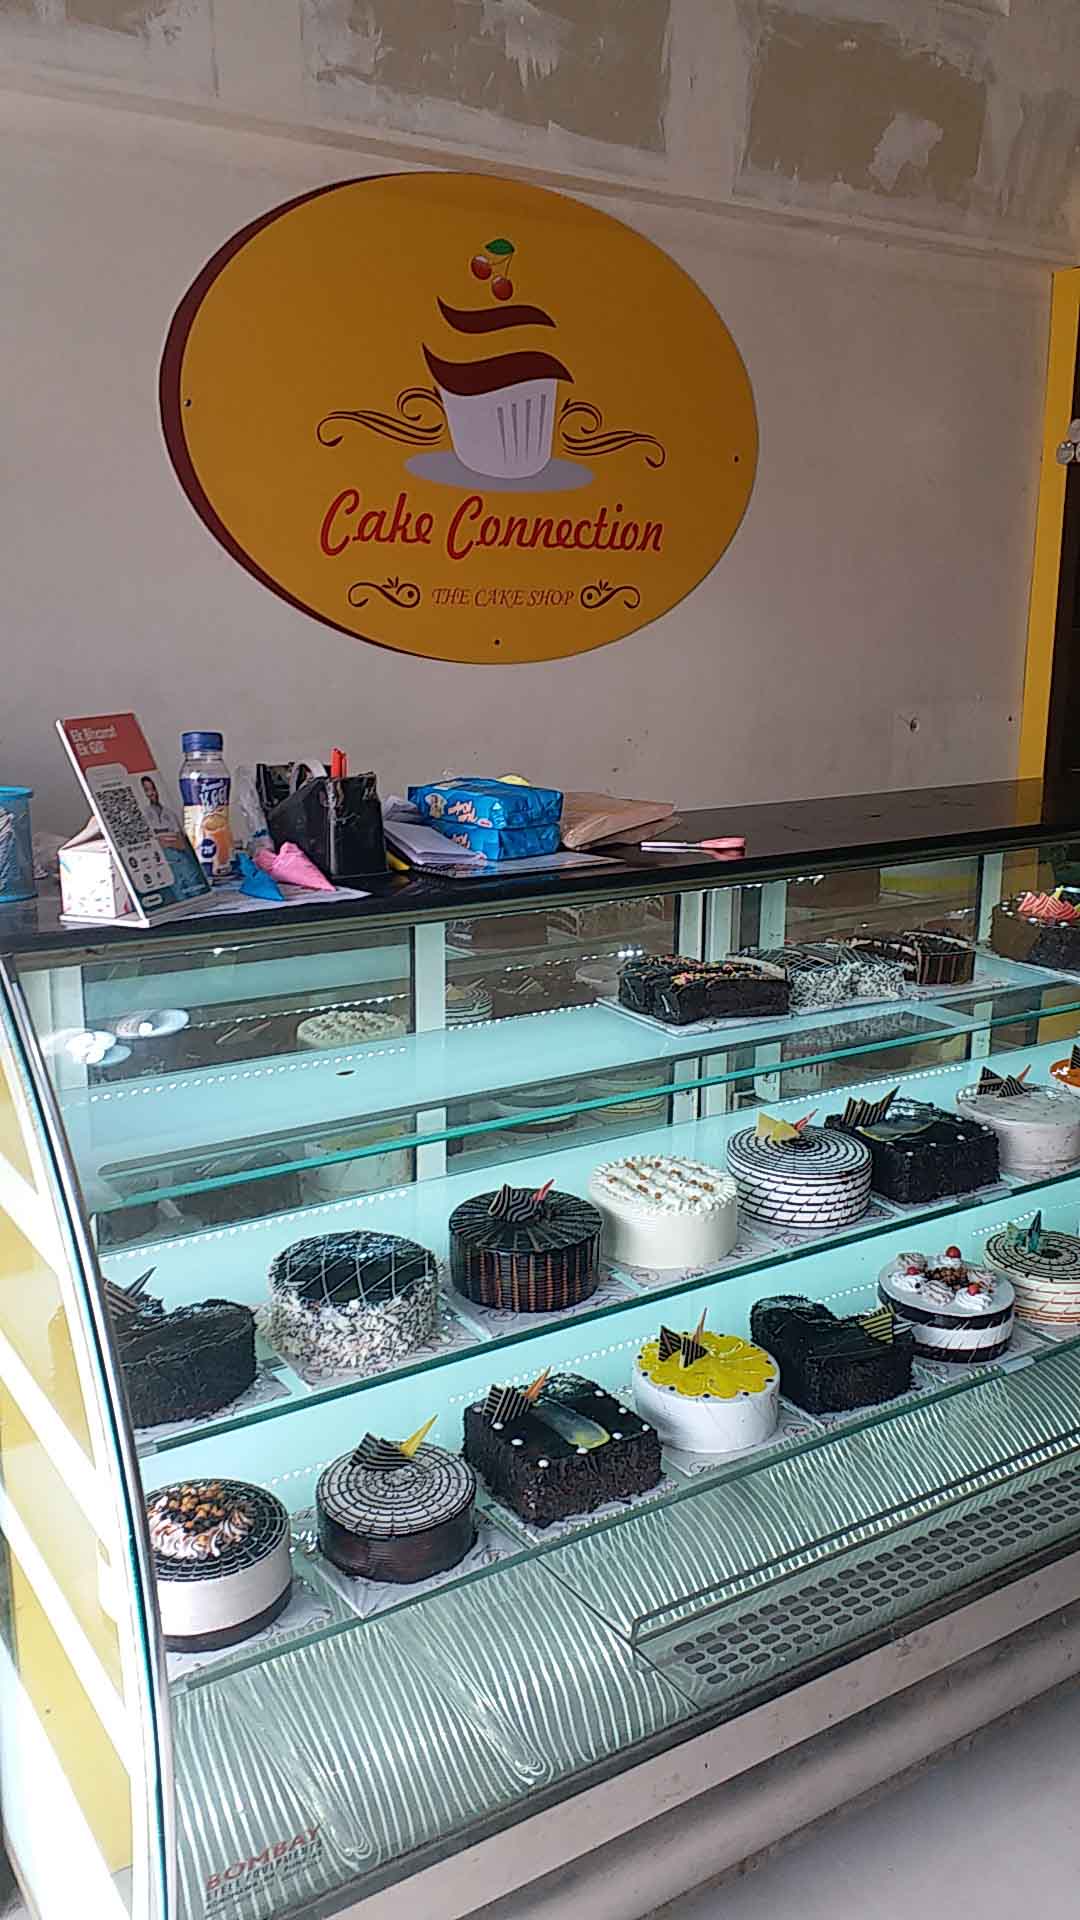 Cake Connection The Cake Shop in Narhe Gaon,Pune - Best Cake Shops in Pune  - Justdial